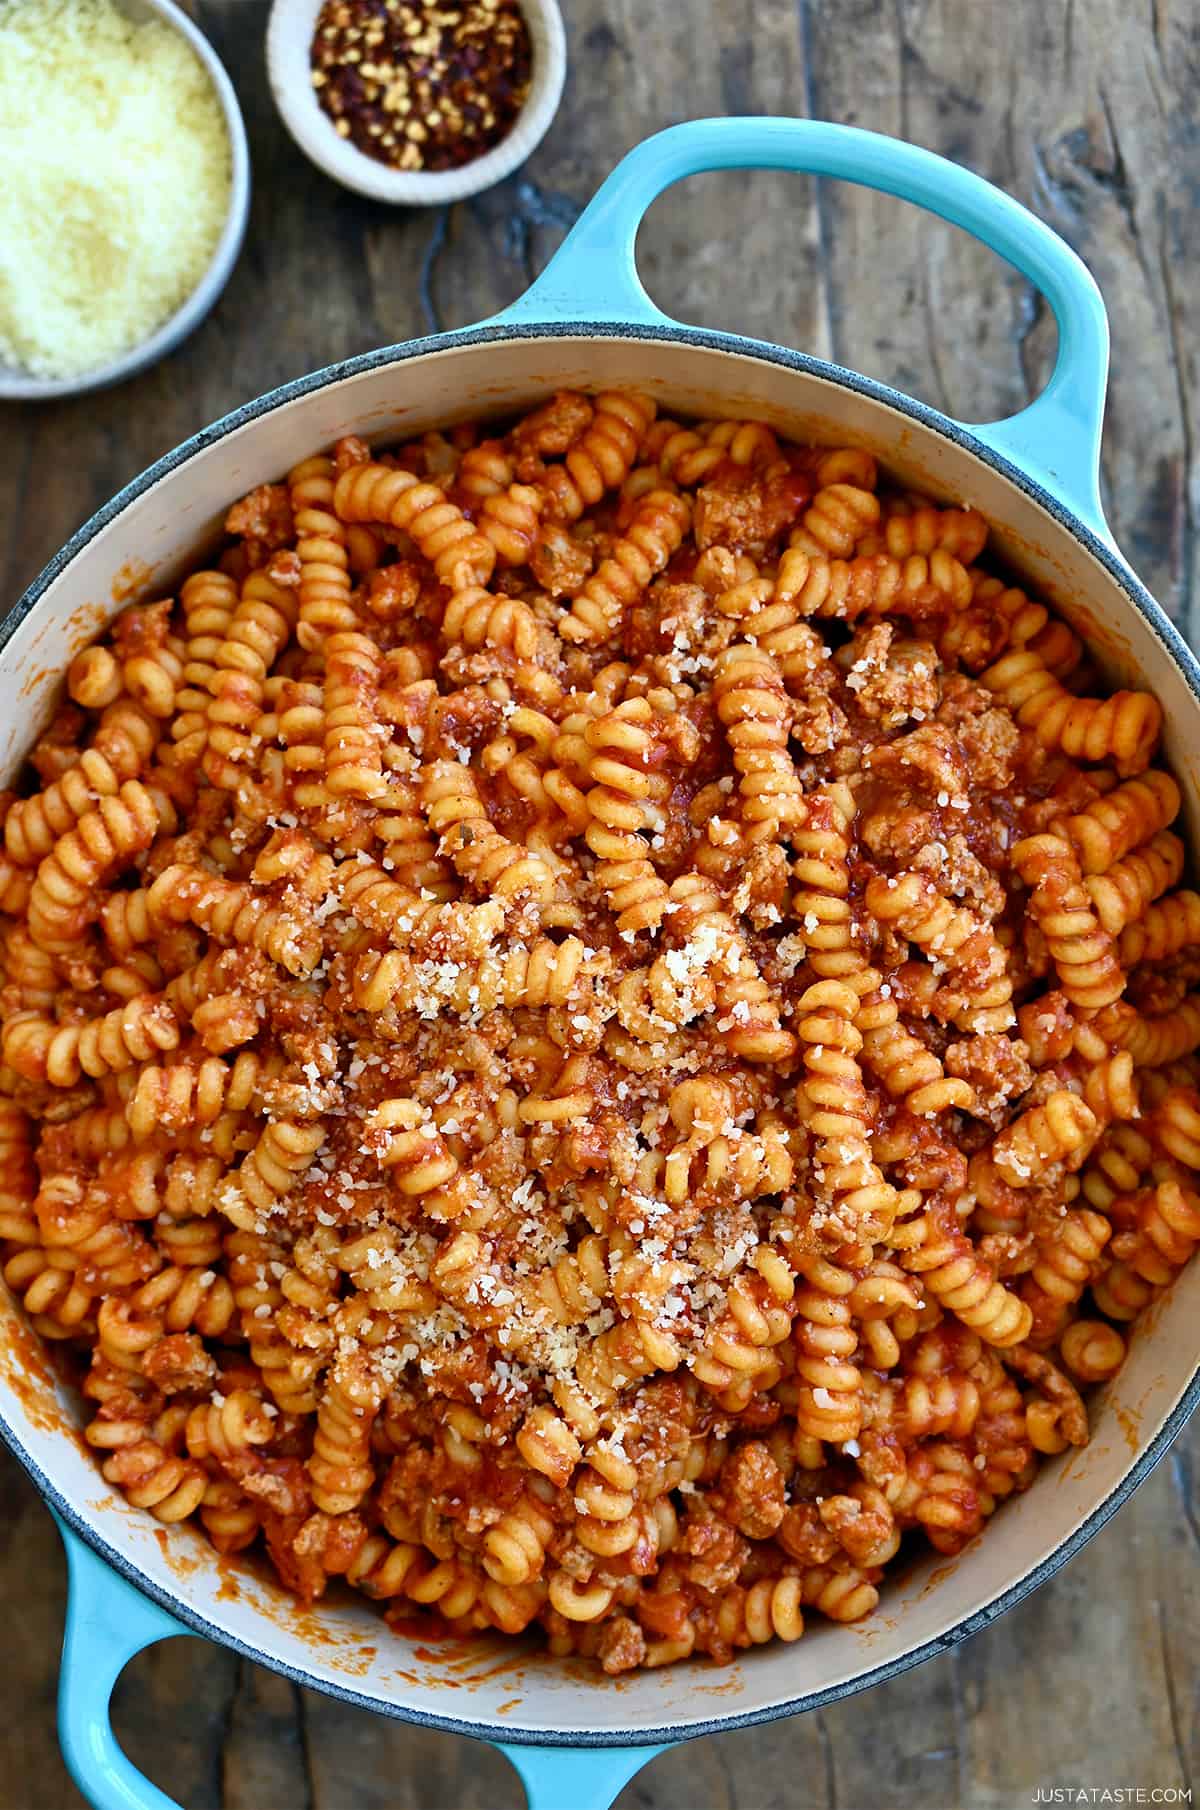 Pasta with marinara sauce and Italian sausage garnished with grated Parmesan cheese in a large stockpot.